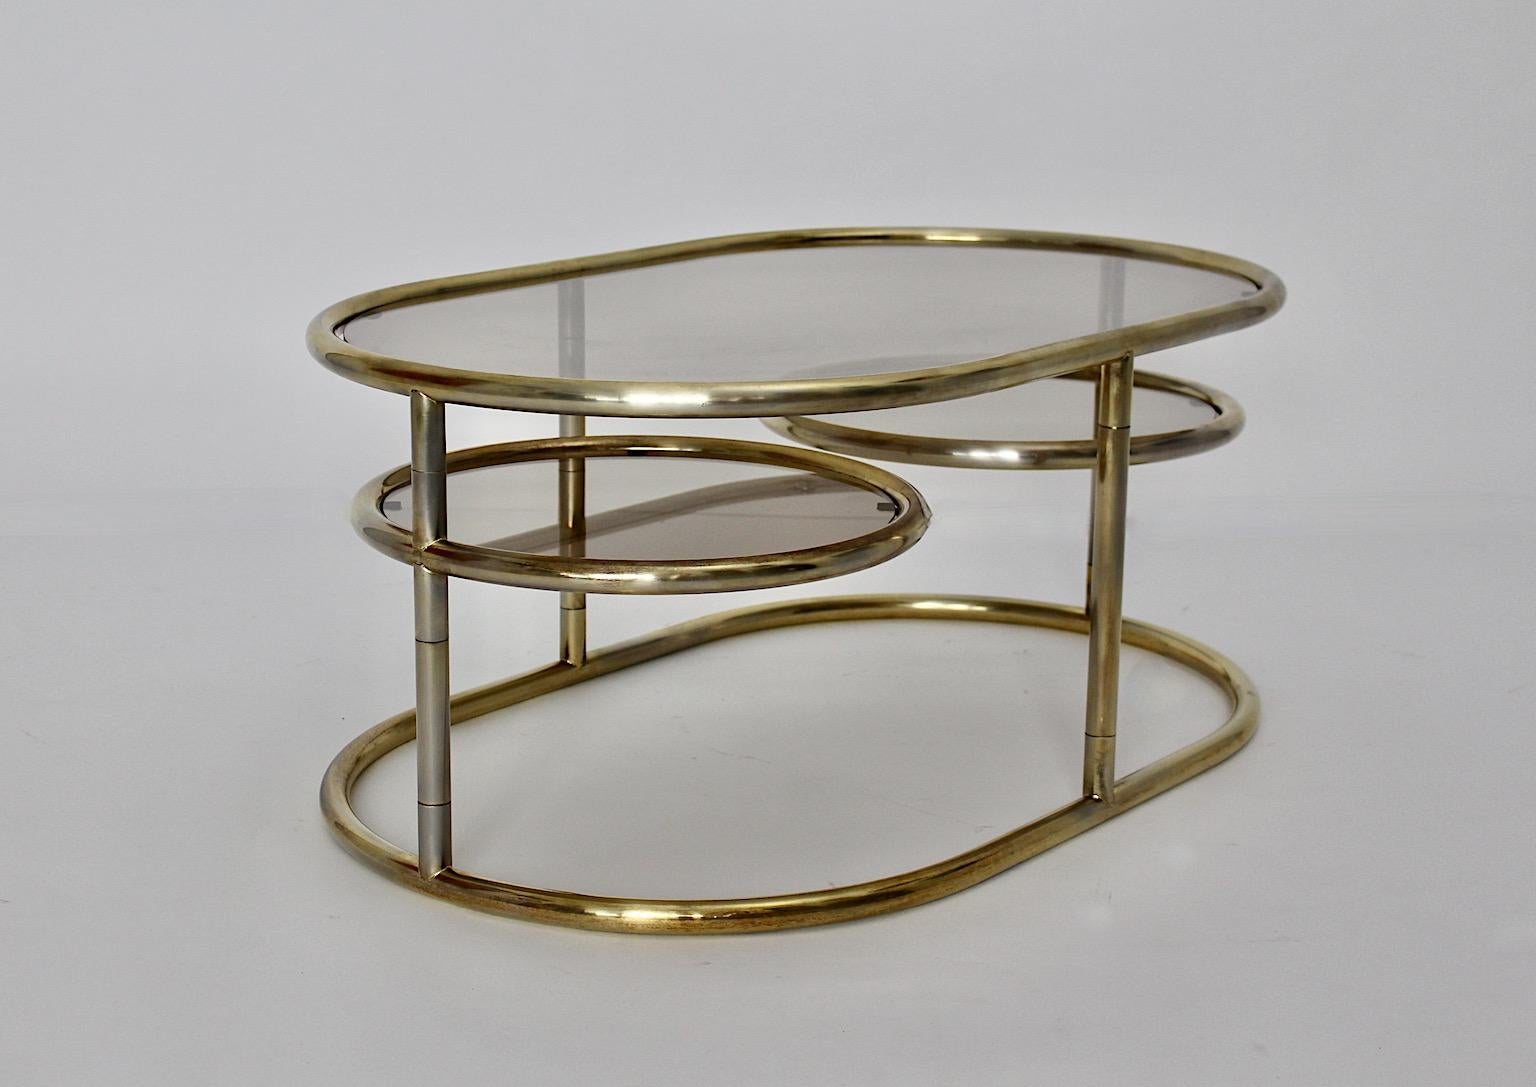 Modernist Vintage Golden Metal Glass Oval Coffee Table Sofa Table, 1960s, Italy In Good Condition For Sale In Vienna, AT